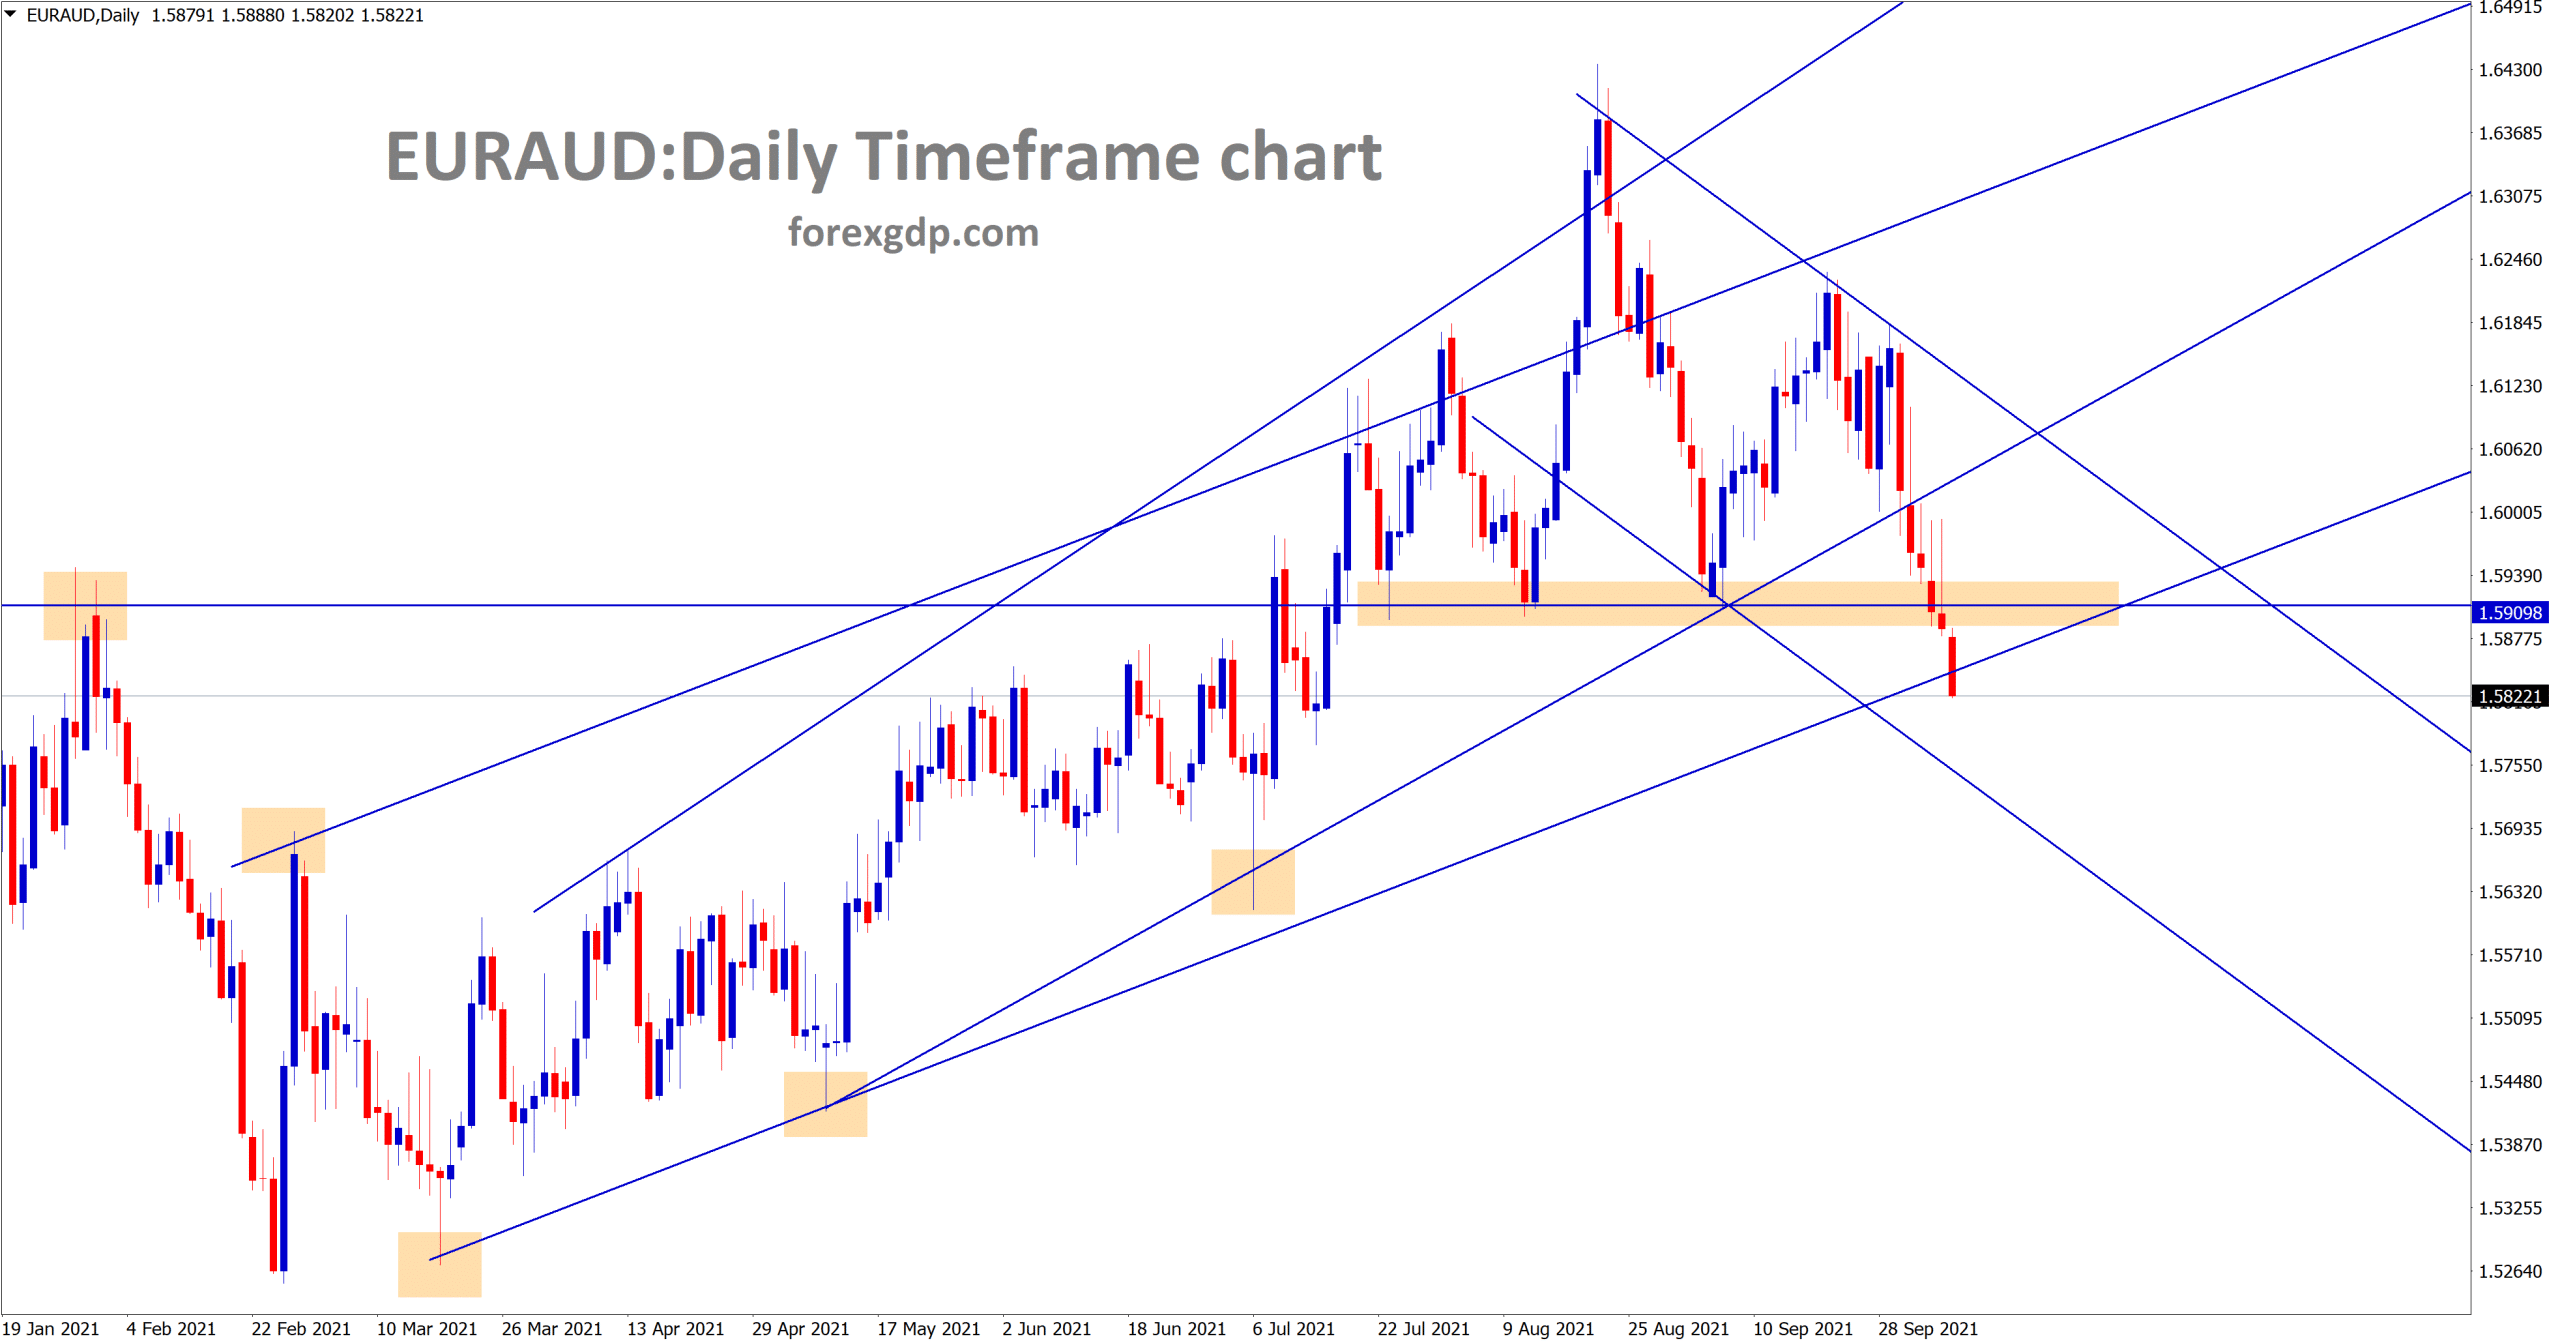 EURAUD has broken the recent horizontal support area and its trying to break the higher low of uptrend line